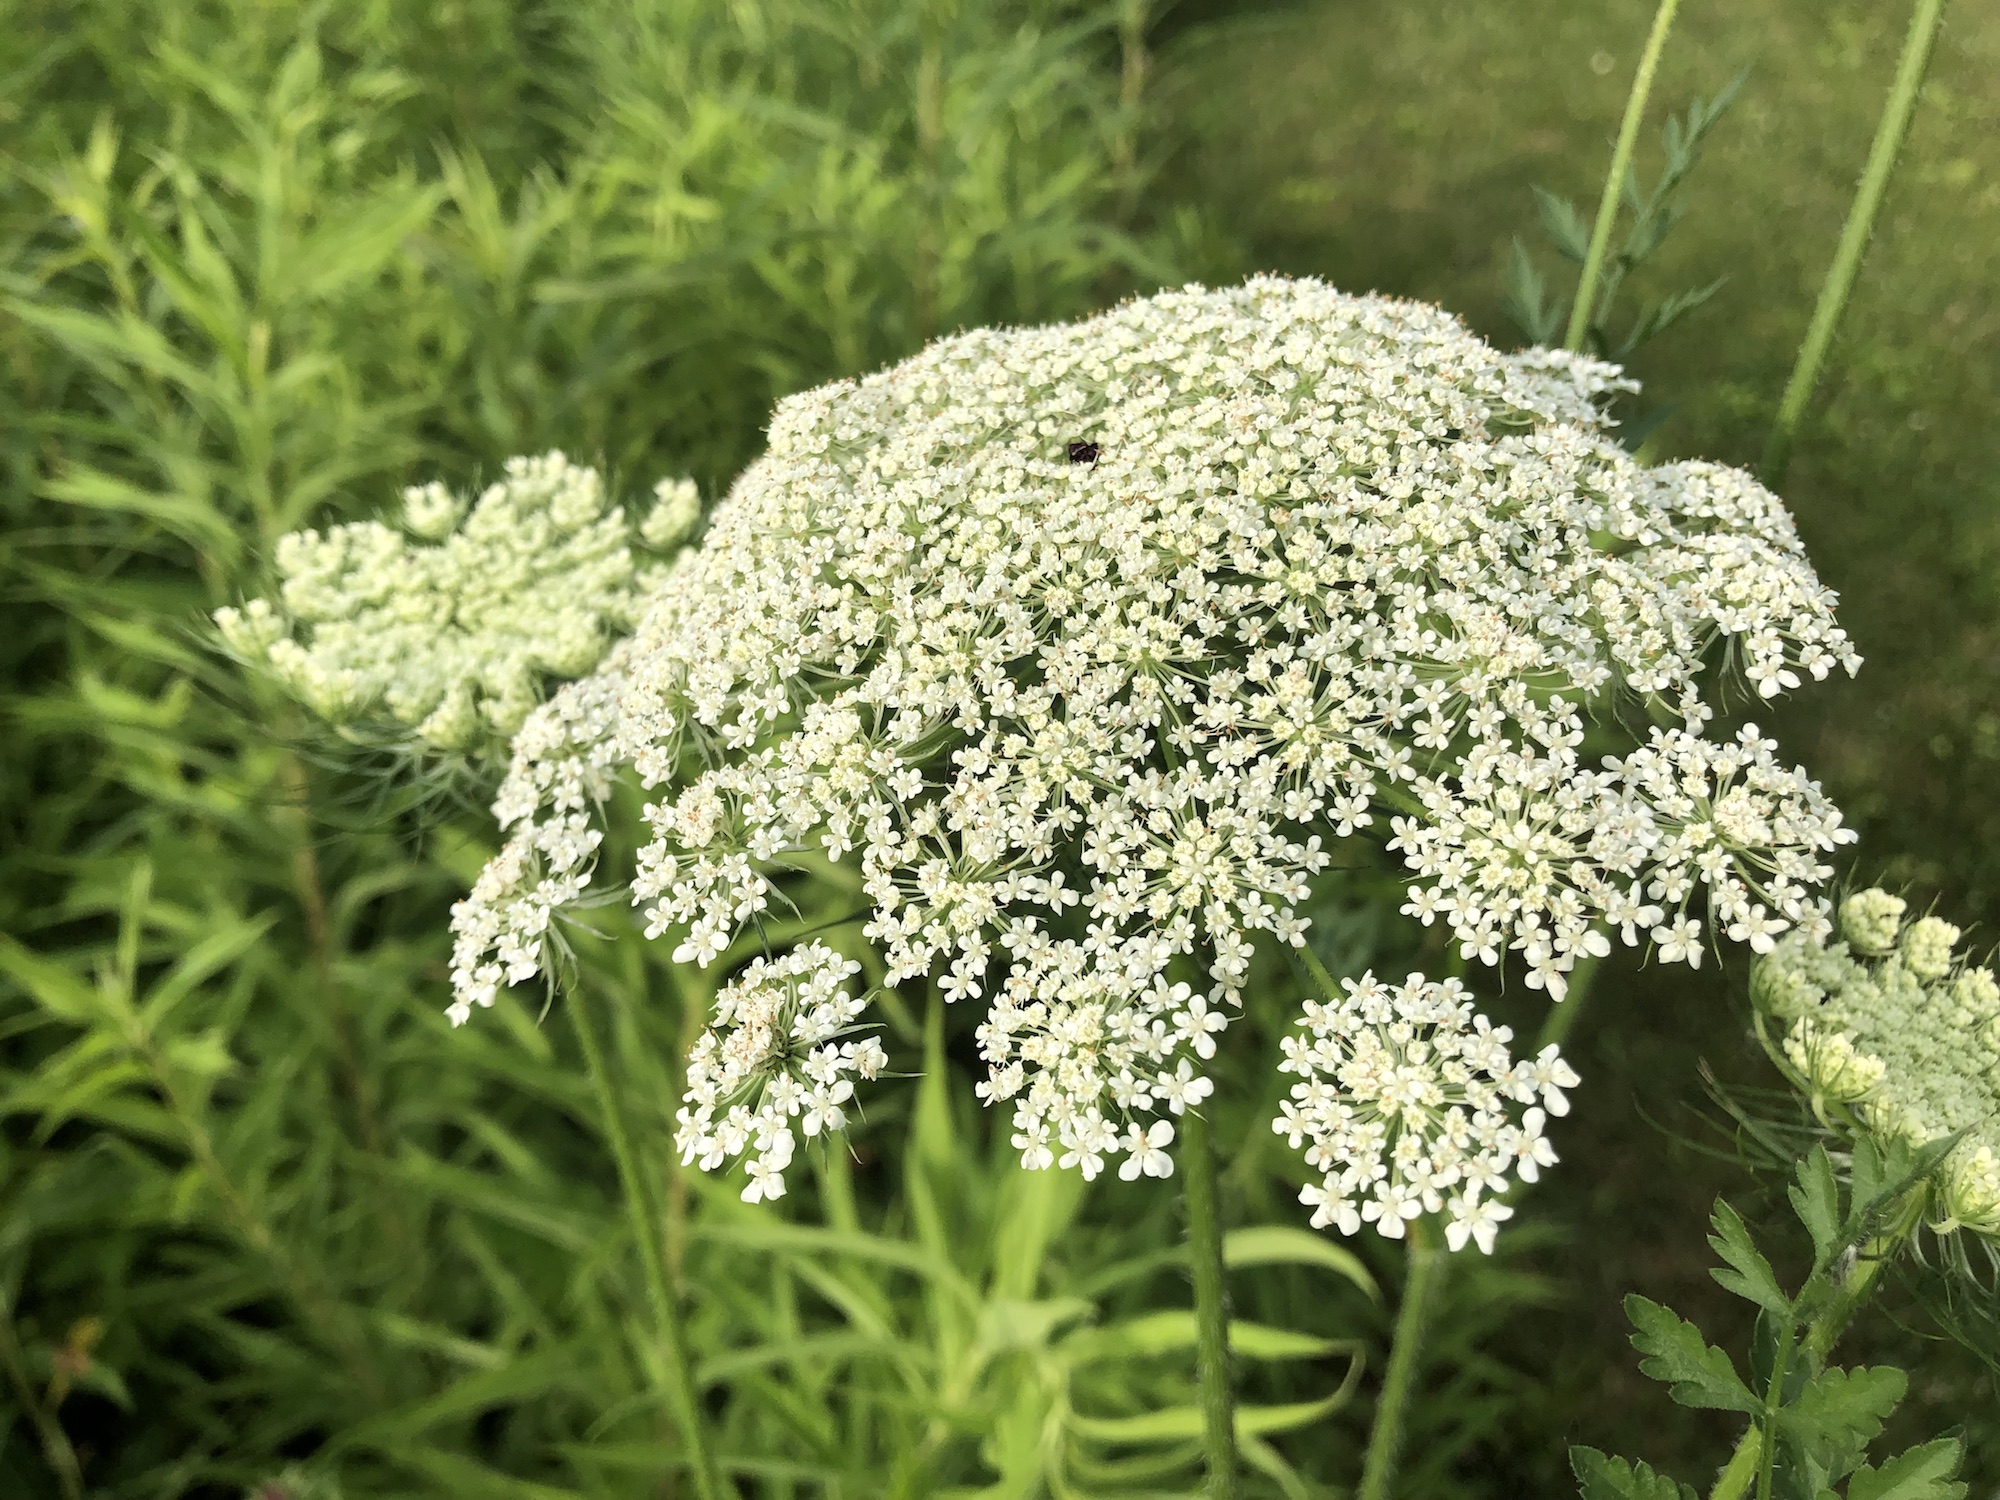 Queen Anne's Lace on bank of retaining pond on the corner of Nakoma Road and Manitou Way in Madison, WI on July 3, 2019.